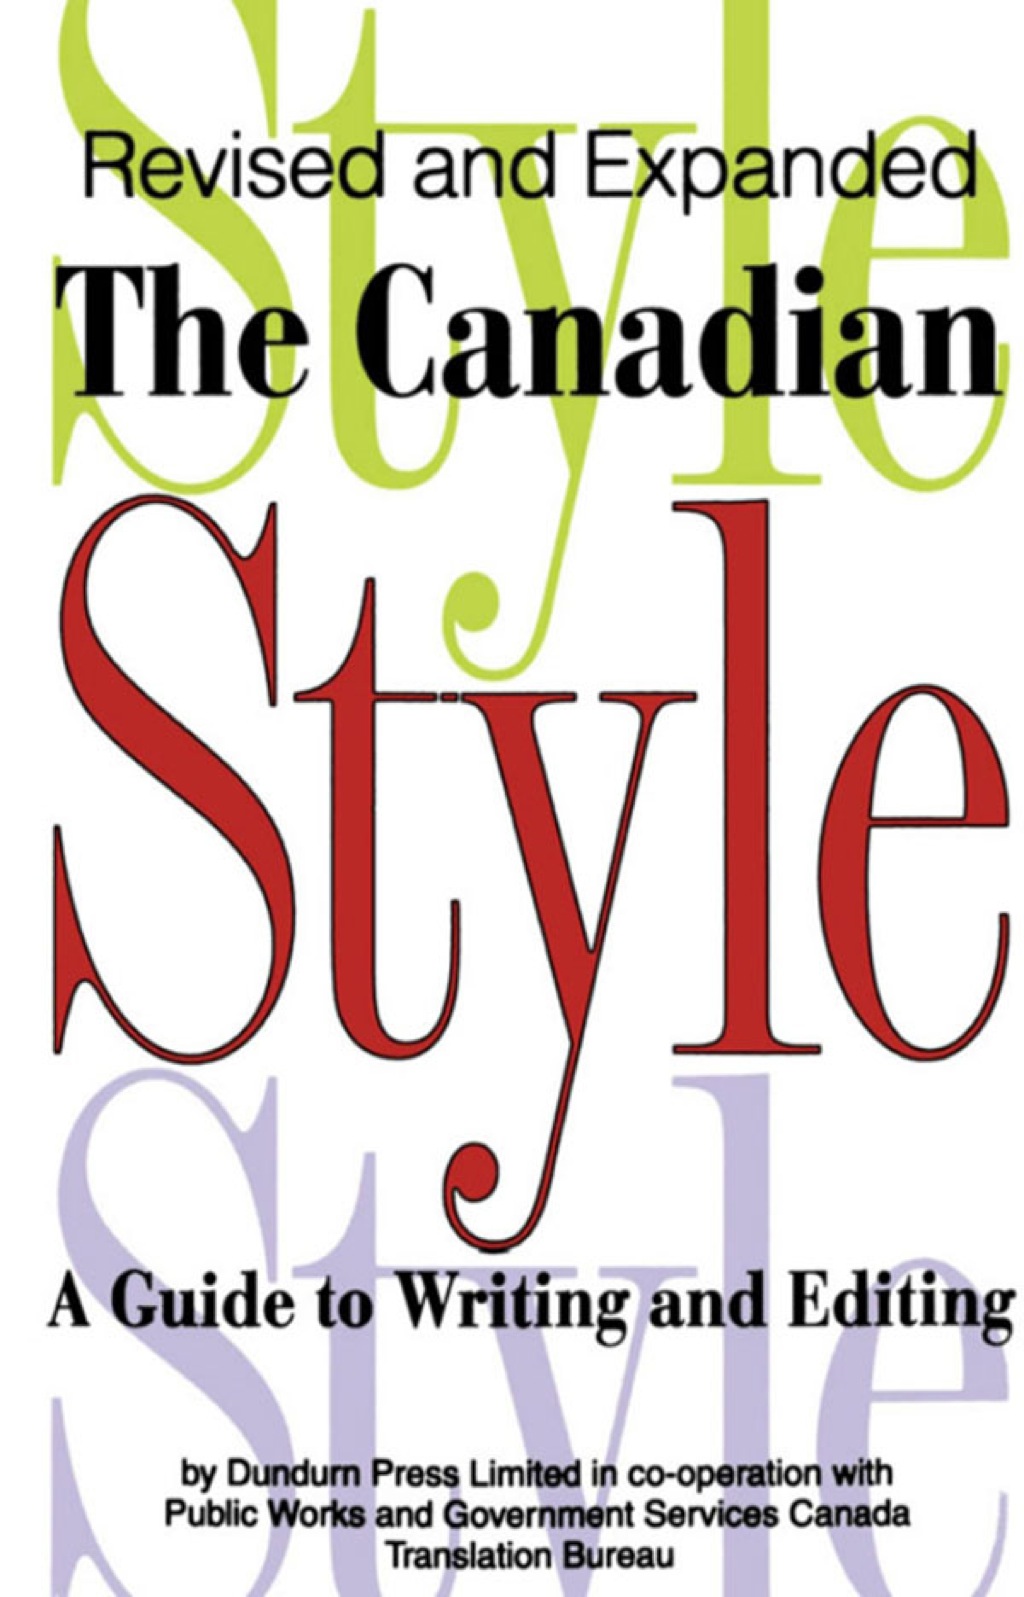 The Canadian Style (eBook) - Public Works and Government Services Canada Translation Bureau; Dundurn Press Limited,